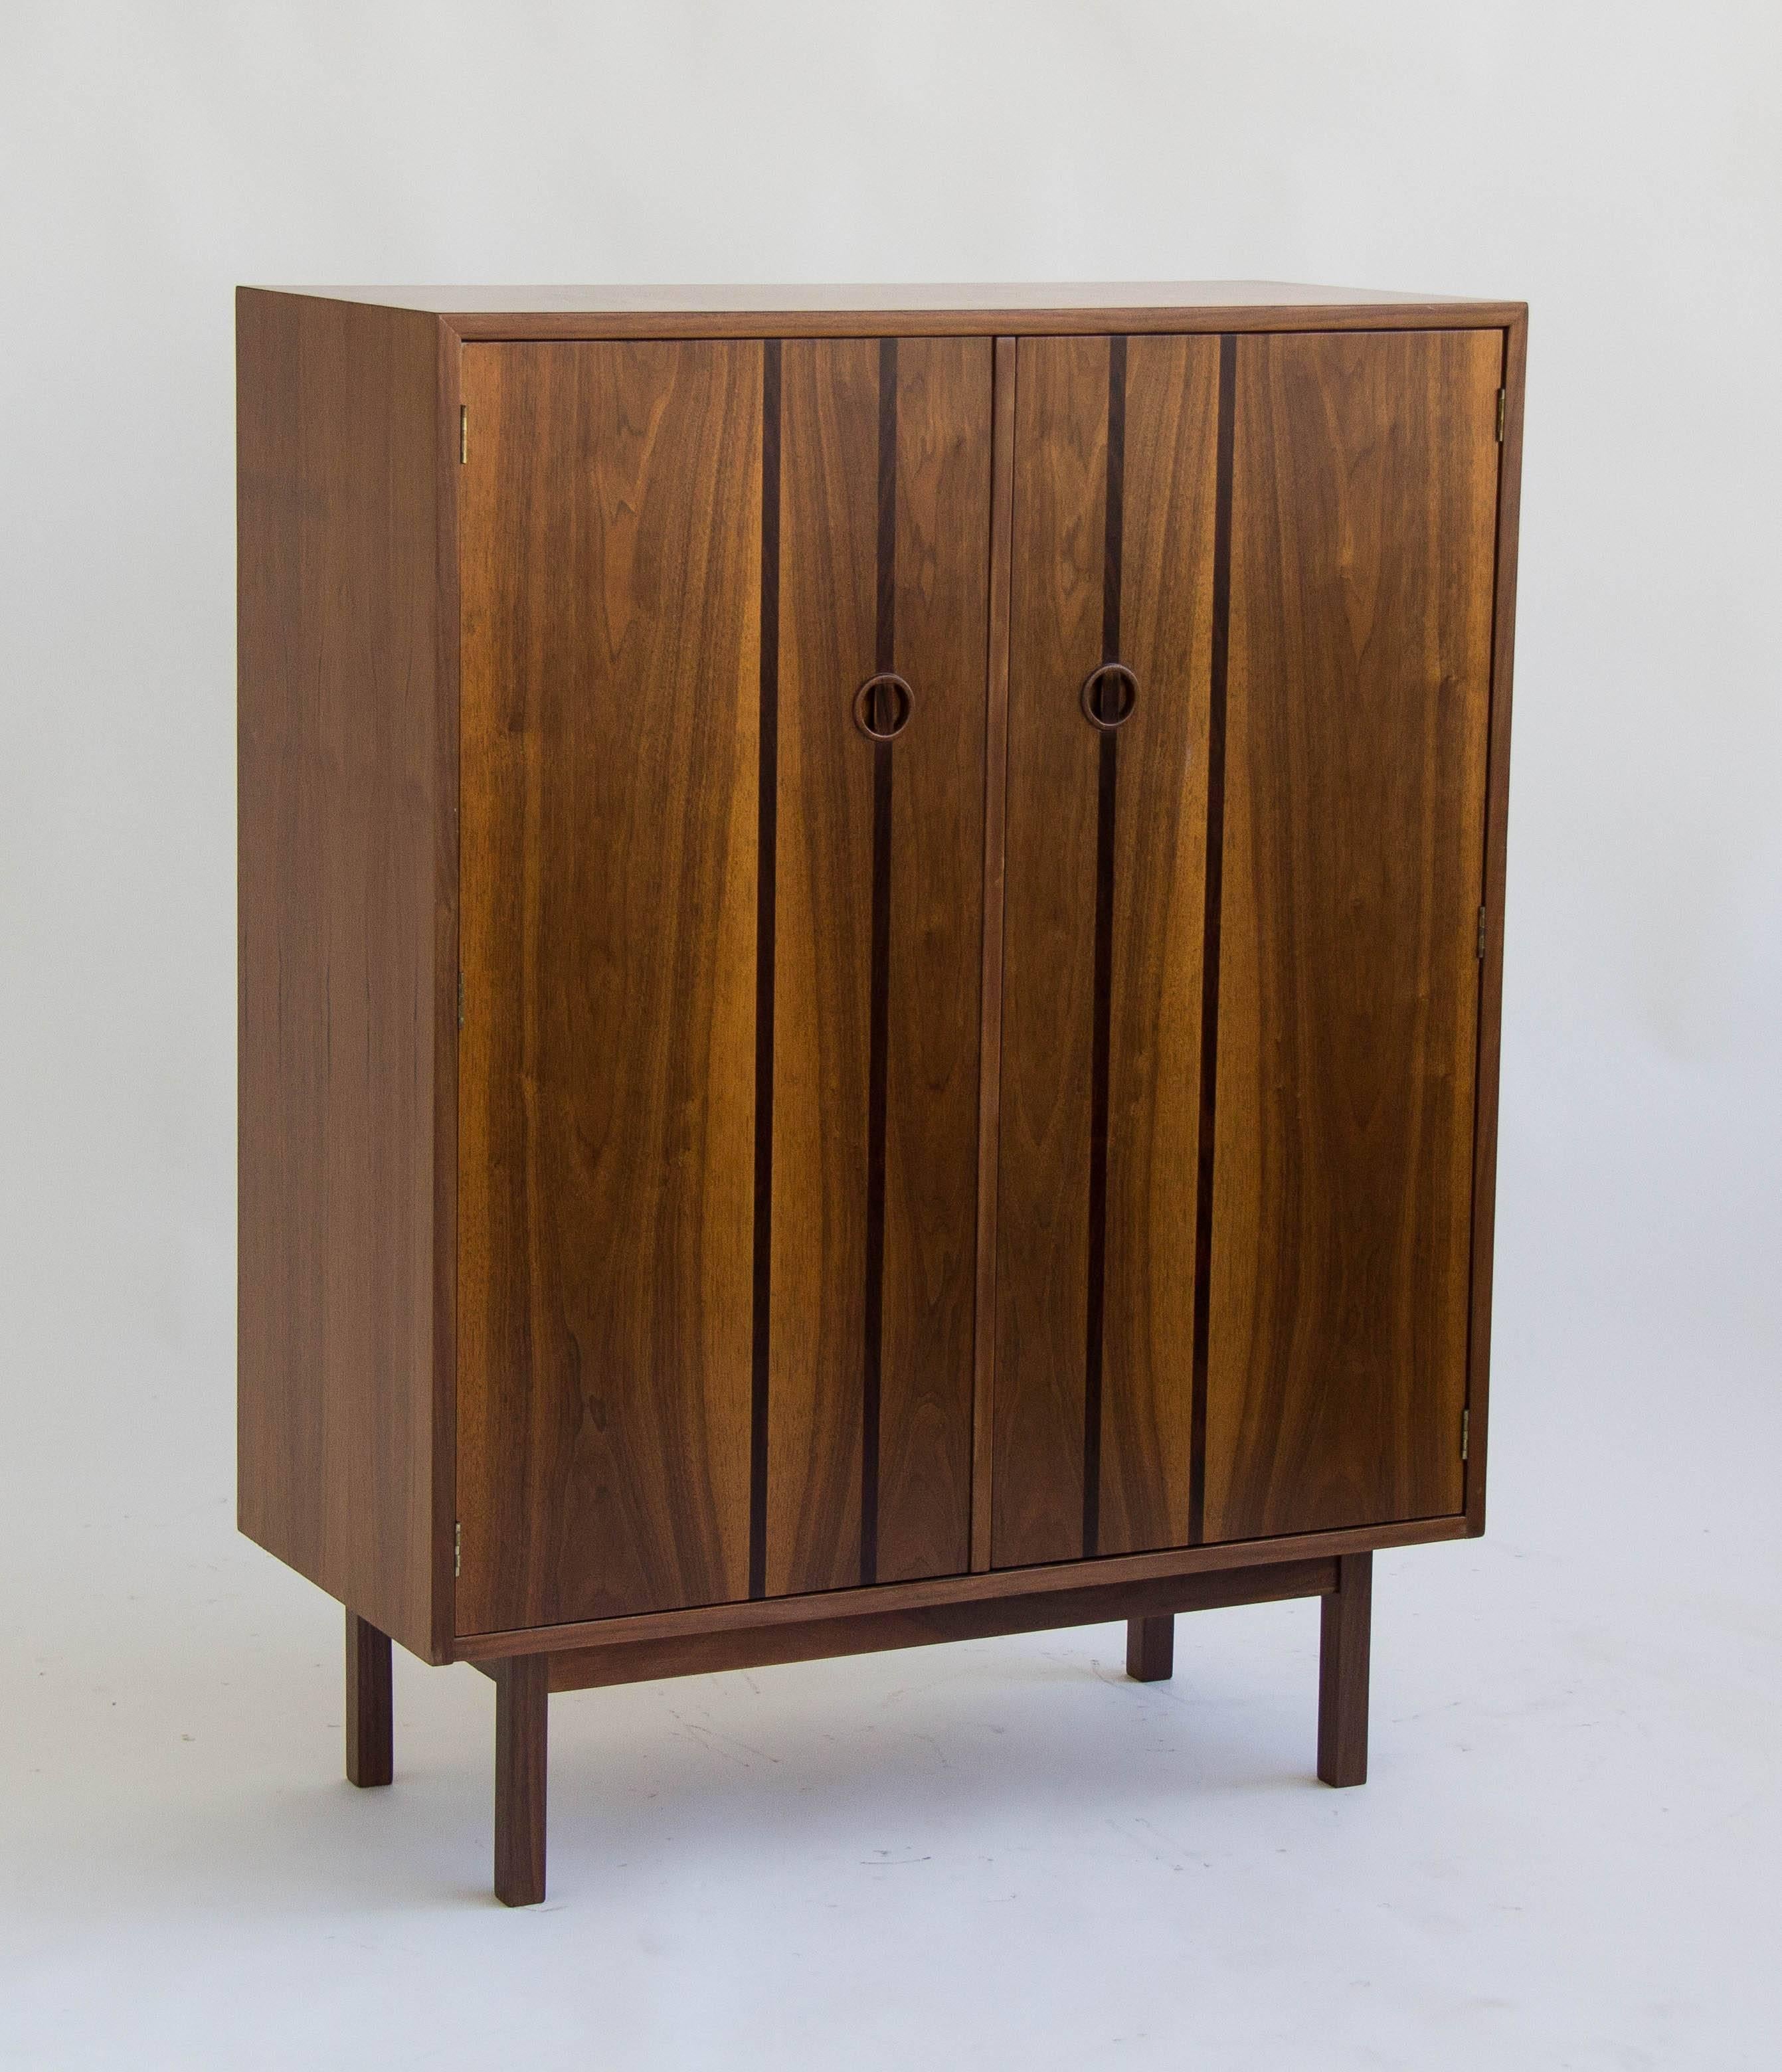 This highboy cabinet by H. Paul Browning for Stanley’s “Royal American” collection has a walnut case, resting on four recessed legs. The front has two doors with recessed round pulls and four slim bands of rosewood veneer detailing. Interior